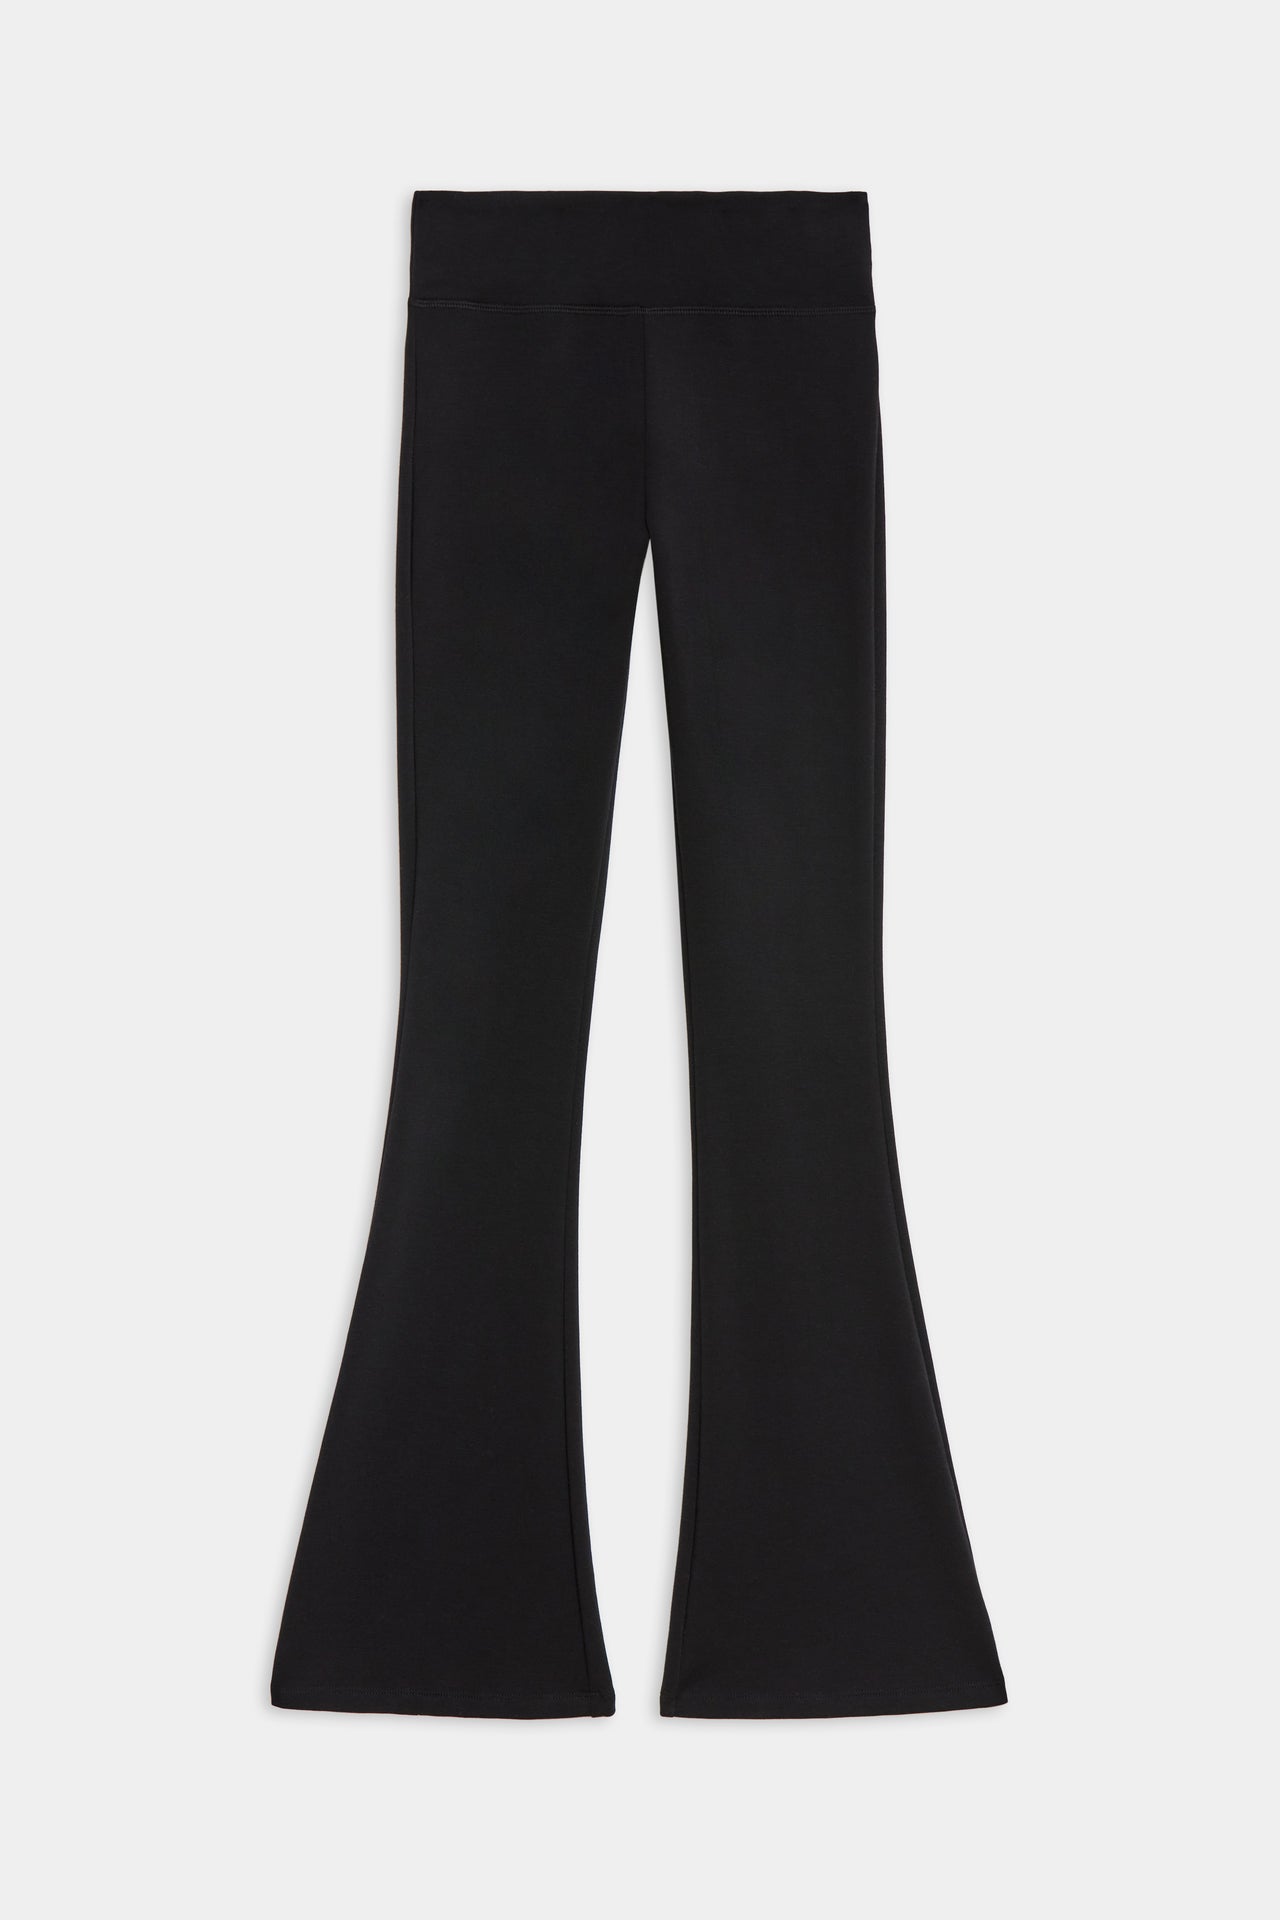 A pair of Raquel Fleece Flare - Black pants by SPLITS59 on a white background.